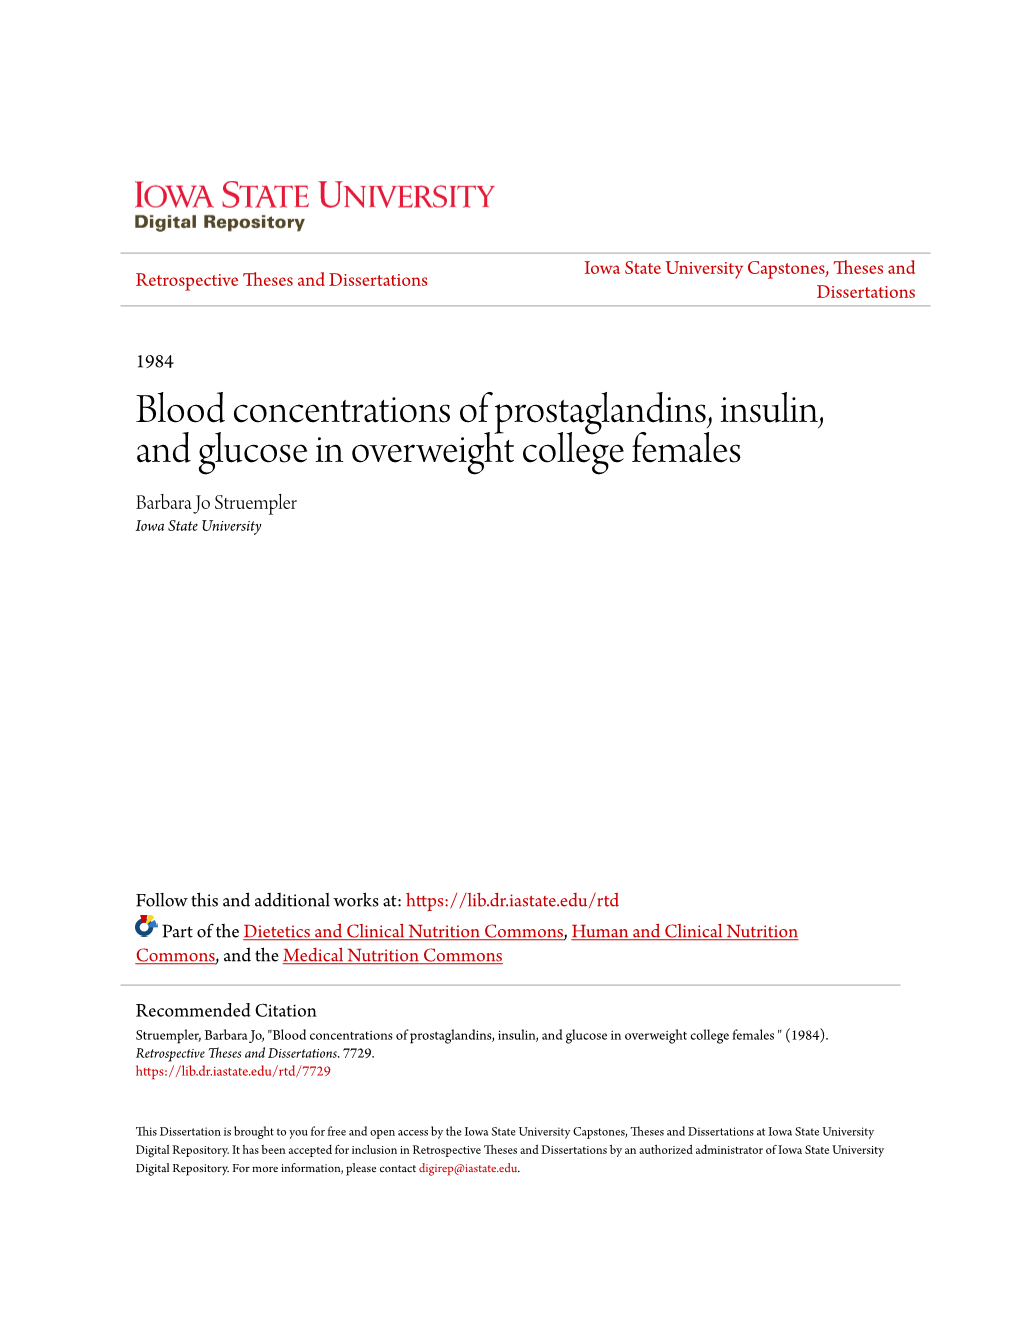 Blood Concentrations of Prostaglandins, Insulin, and Glucose in Overweight College Females Barbara Jo Struempler Iowa State University